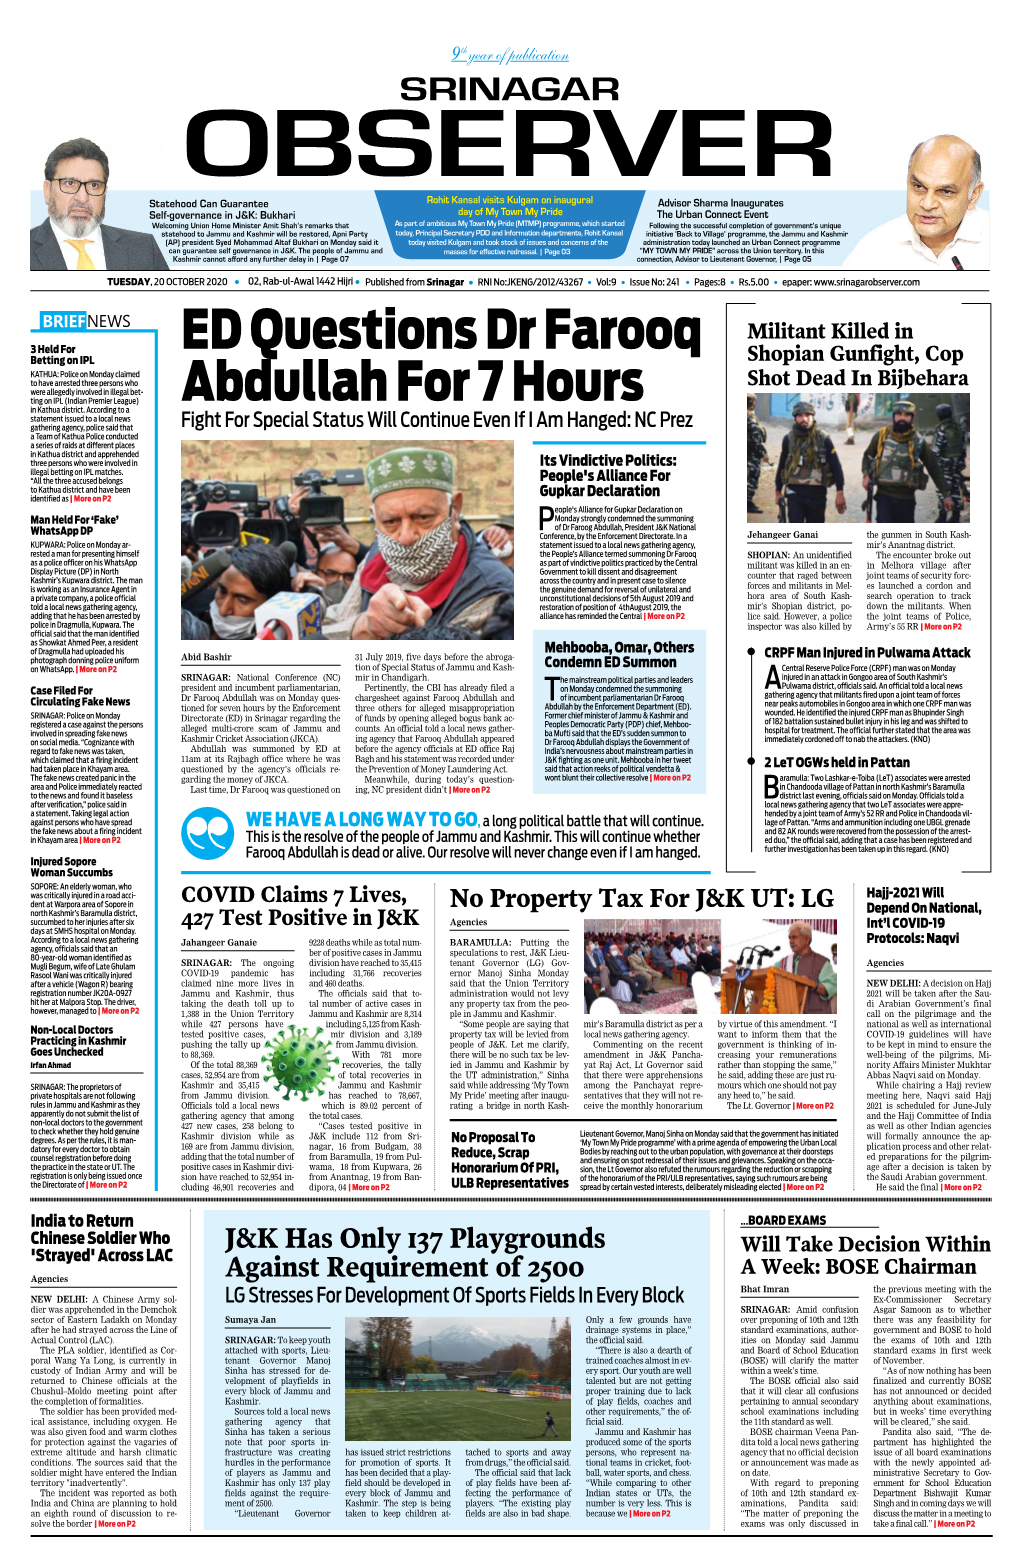 Ed Questions Dr Farooq Abdullah for 7 Hours